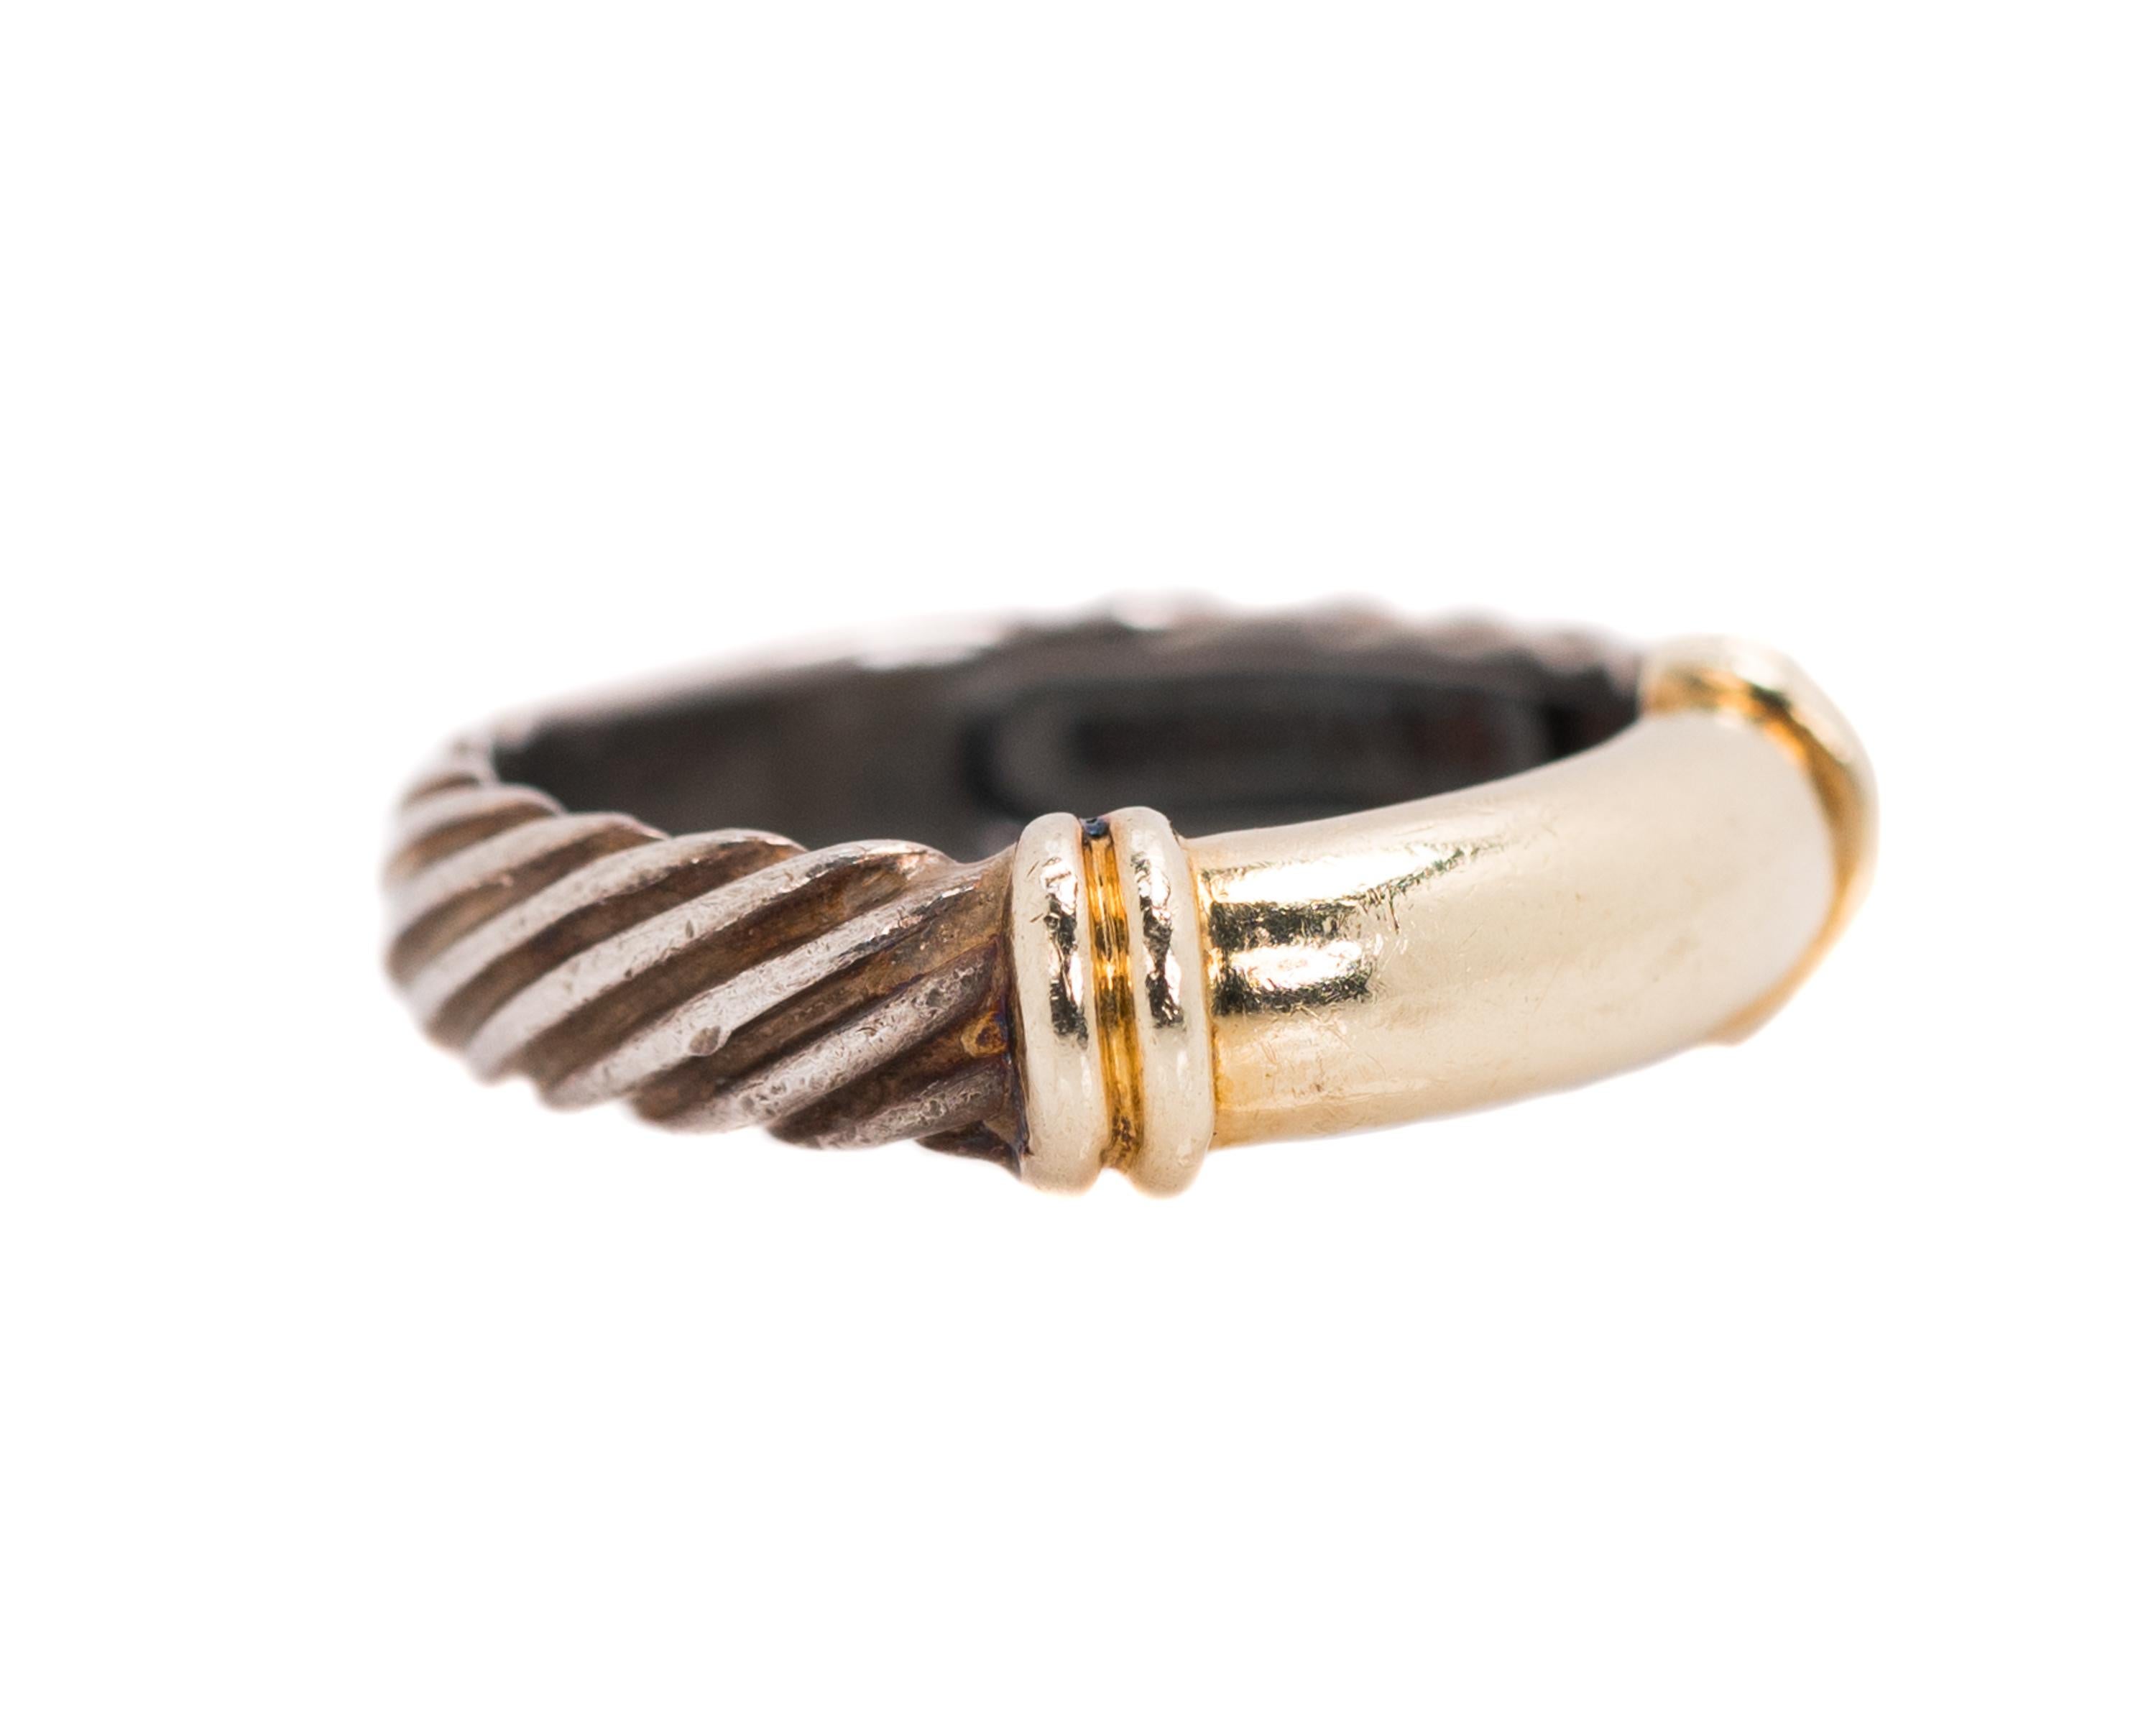 1980s David Yurman Cable Ring - Sterling Silver, 14 Karat Yellow Gold

Features: 
Sterling Silver Cable Shank
14 Karat Yellow Gold smooth center front 
Smooth center back 
4.5 millimeter shank width
Fits a size 5.25, can be resized

Ring